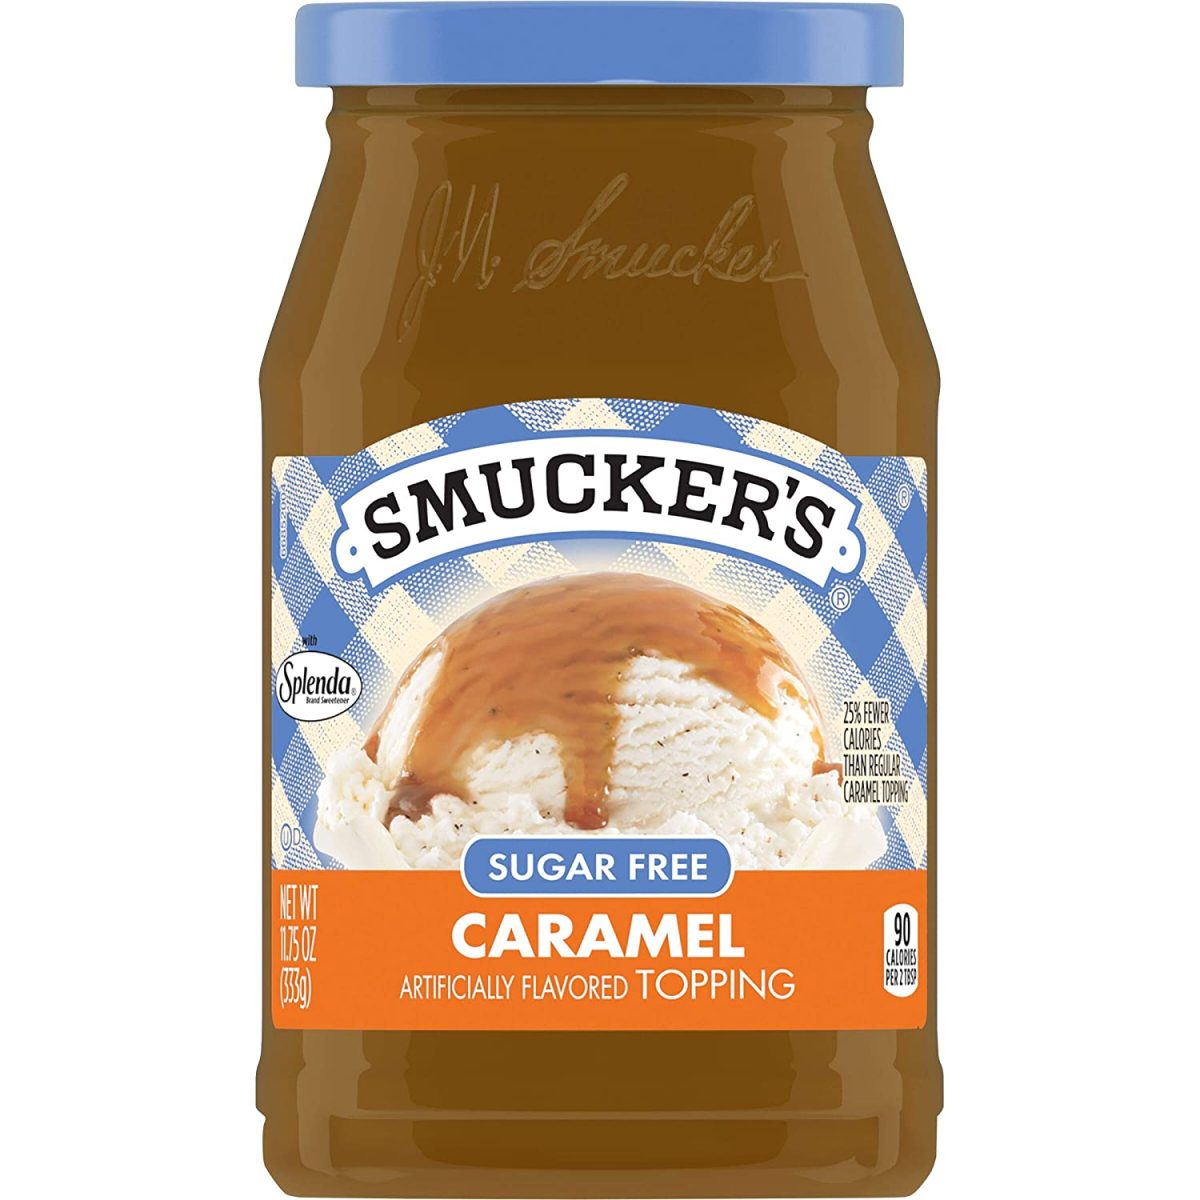 Smucker's Sugar Free Caramel Flavored Topping